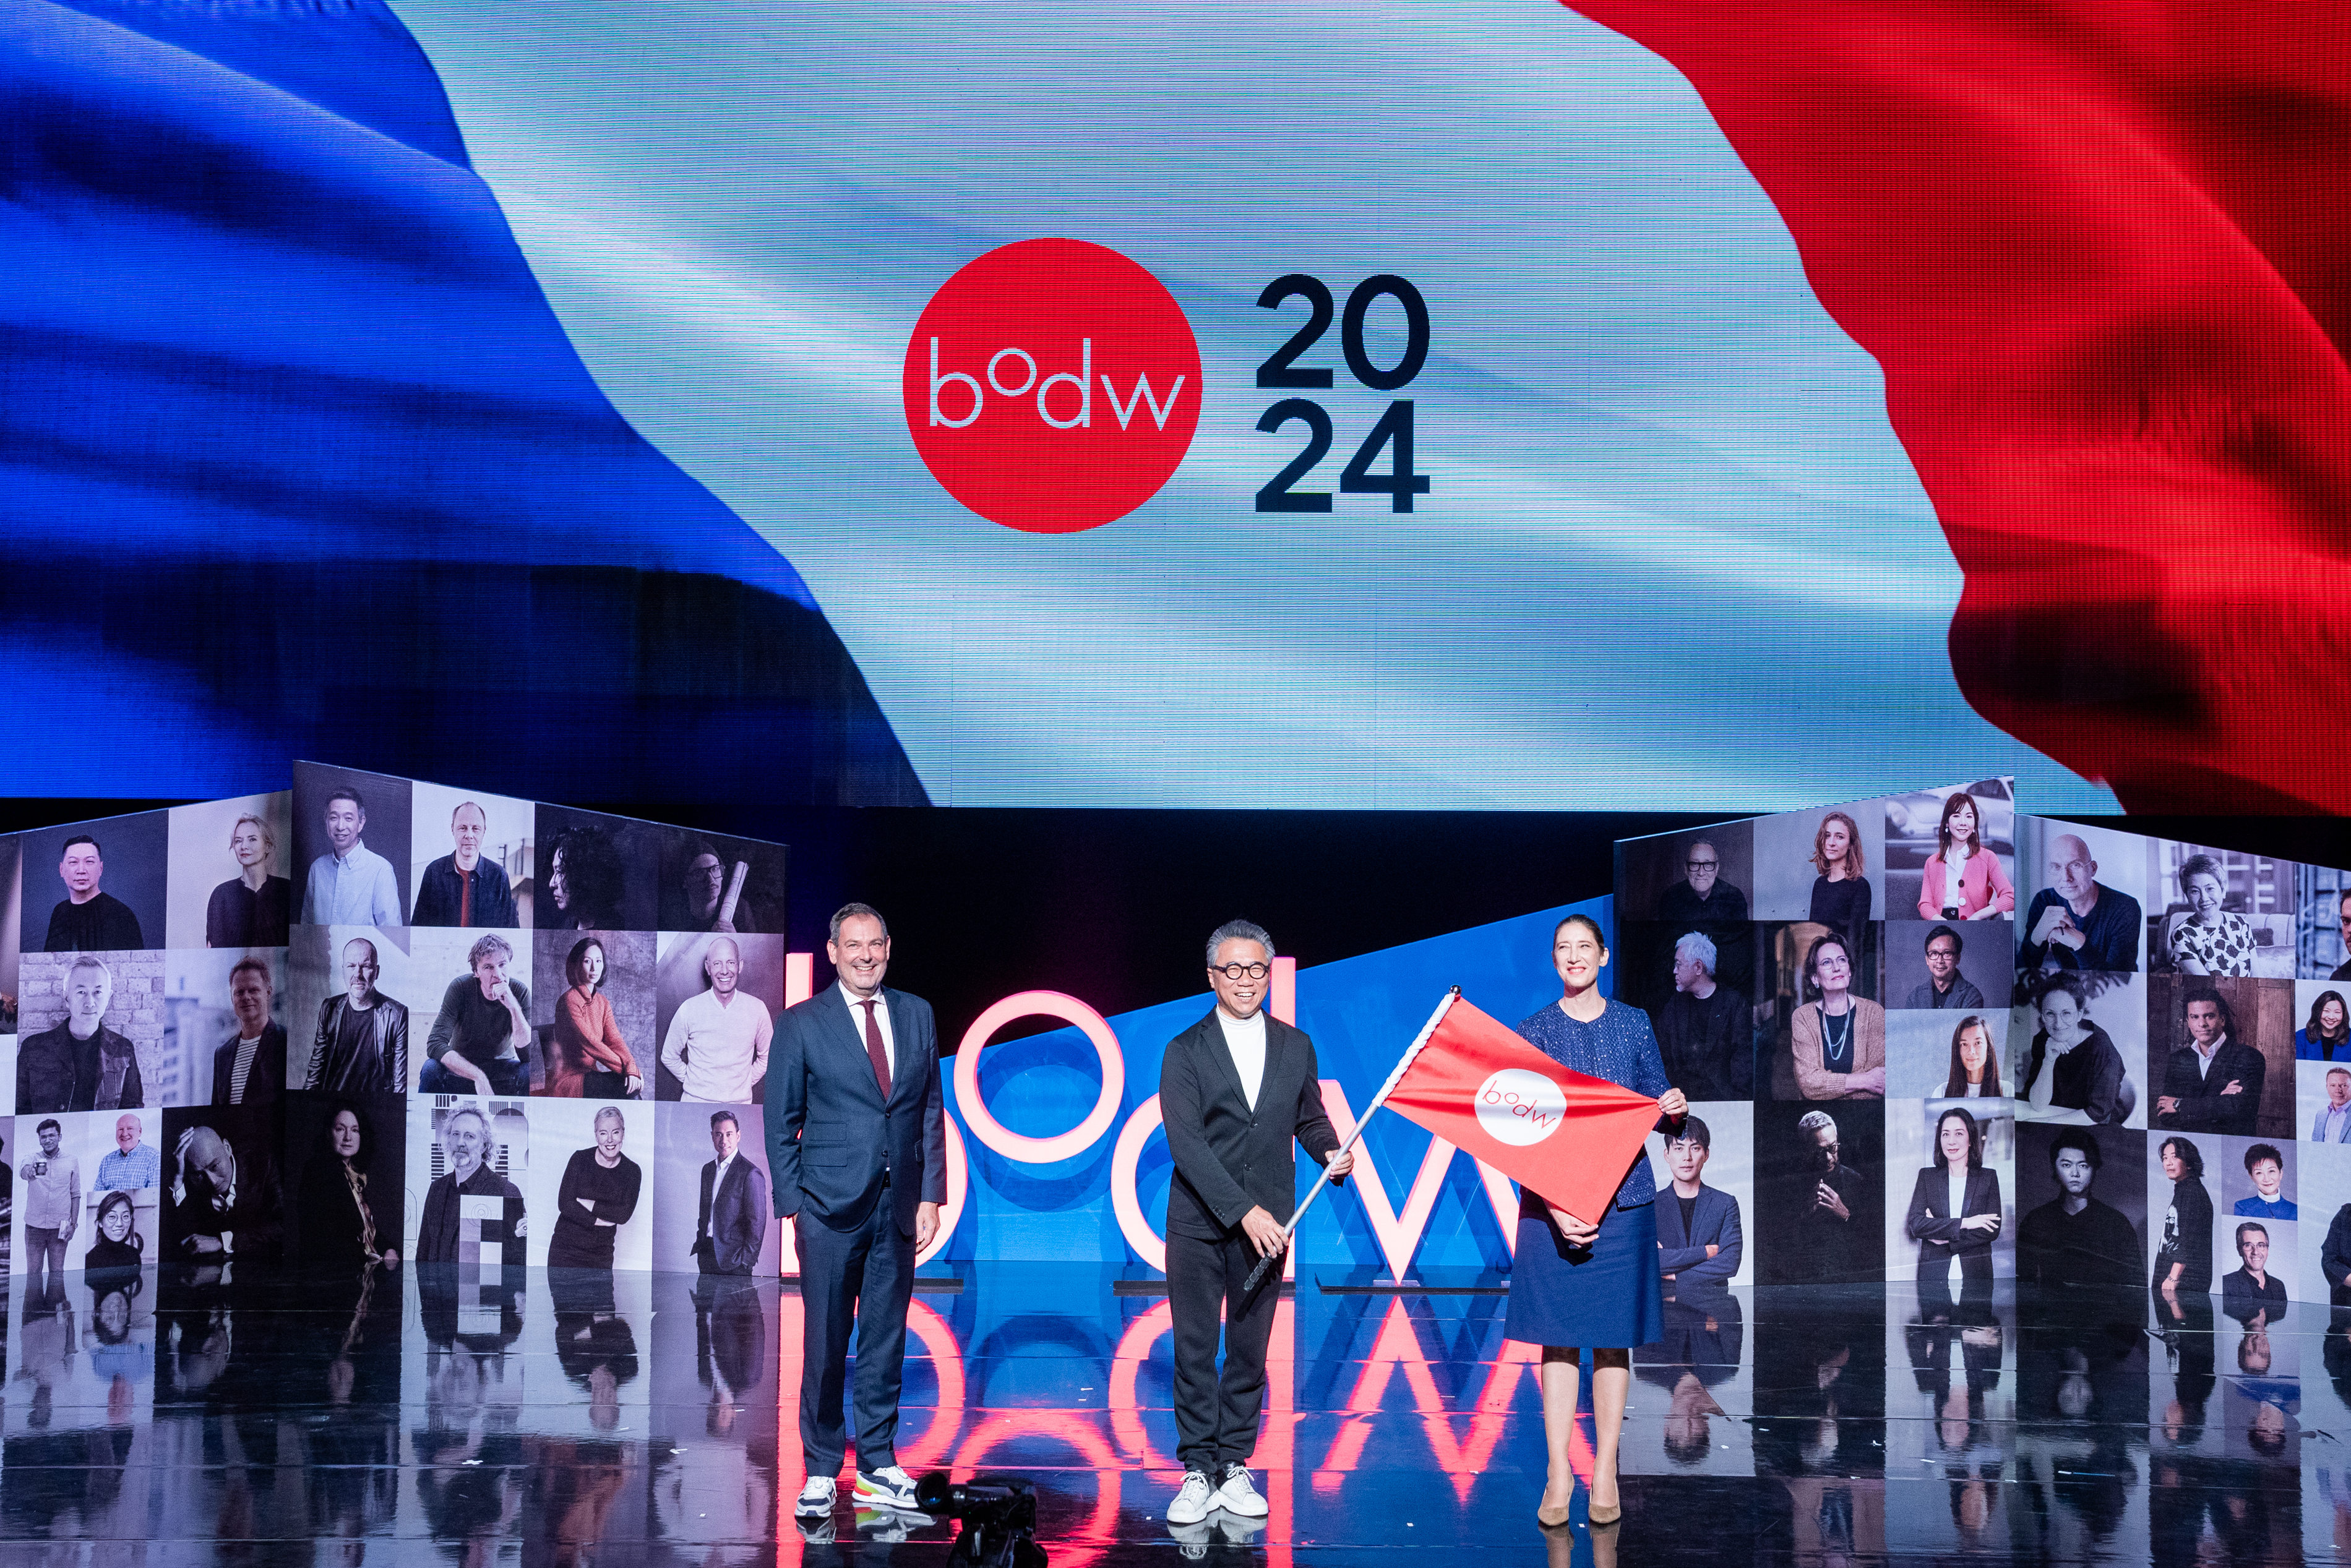 Business of Design Week 2023 and the Netherlands Leading the Way to a Circular Future, with a Focus on Changing the Scene through Design and Innovations | France announced as Partner Country for BODW 2024